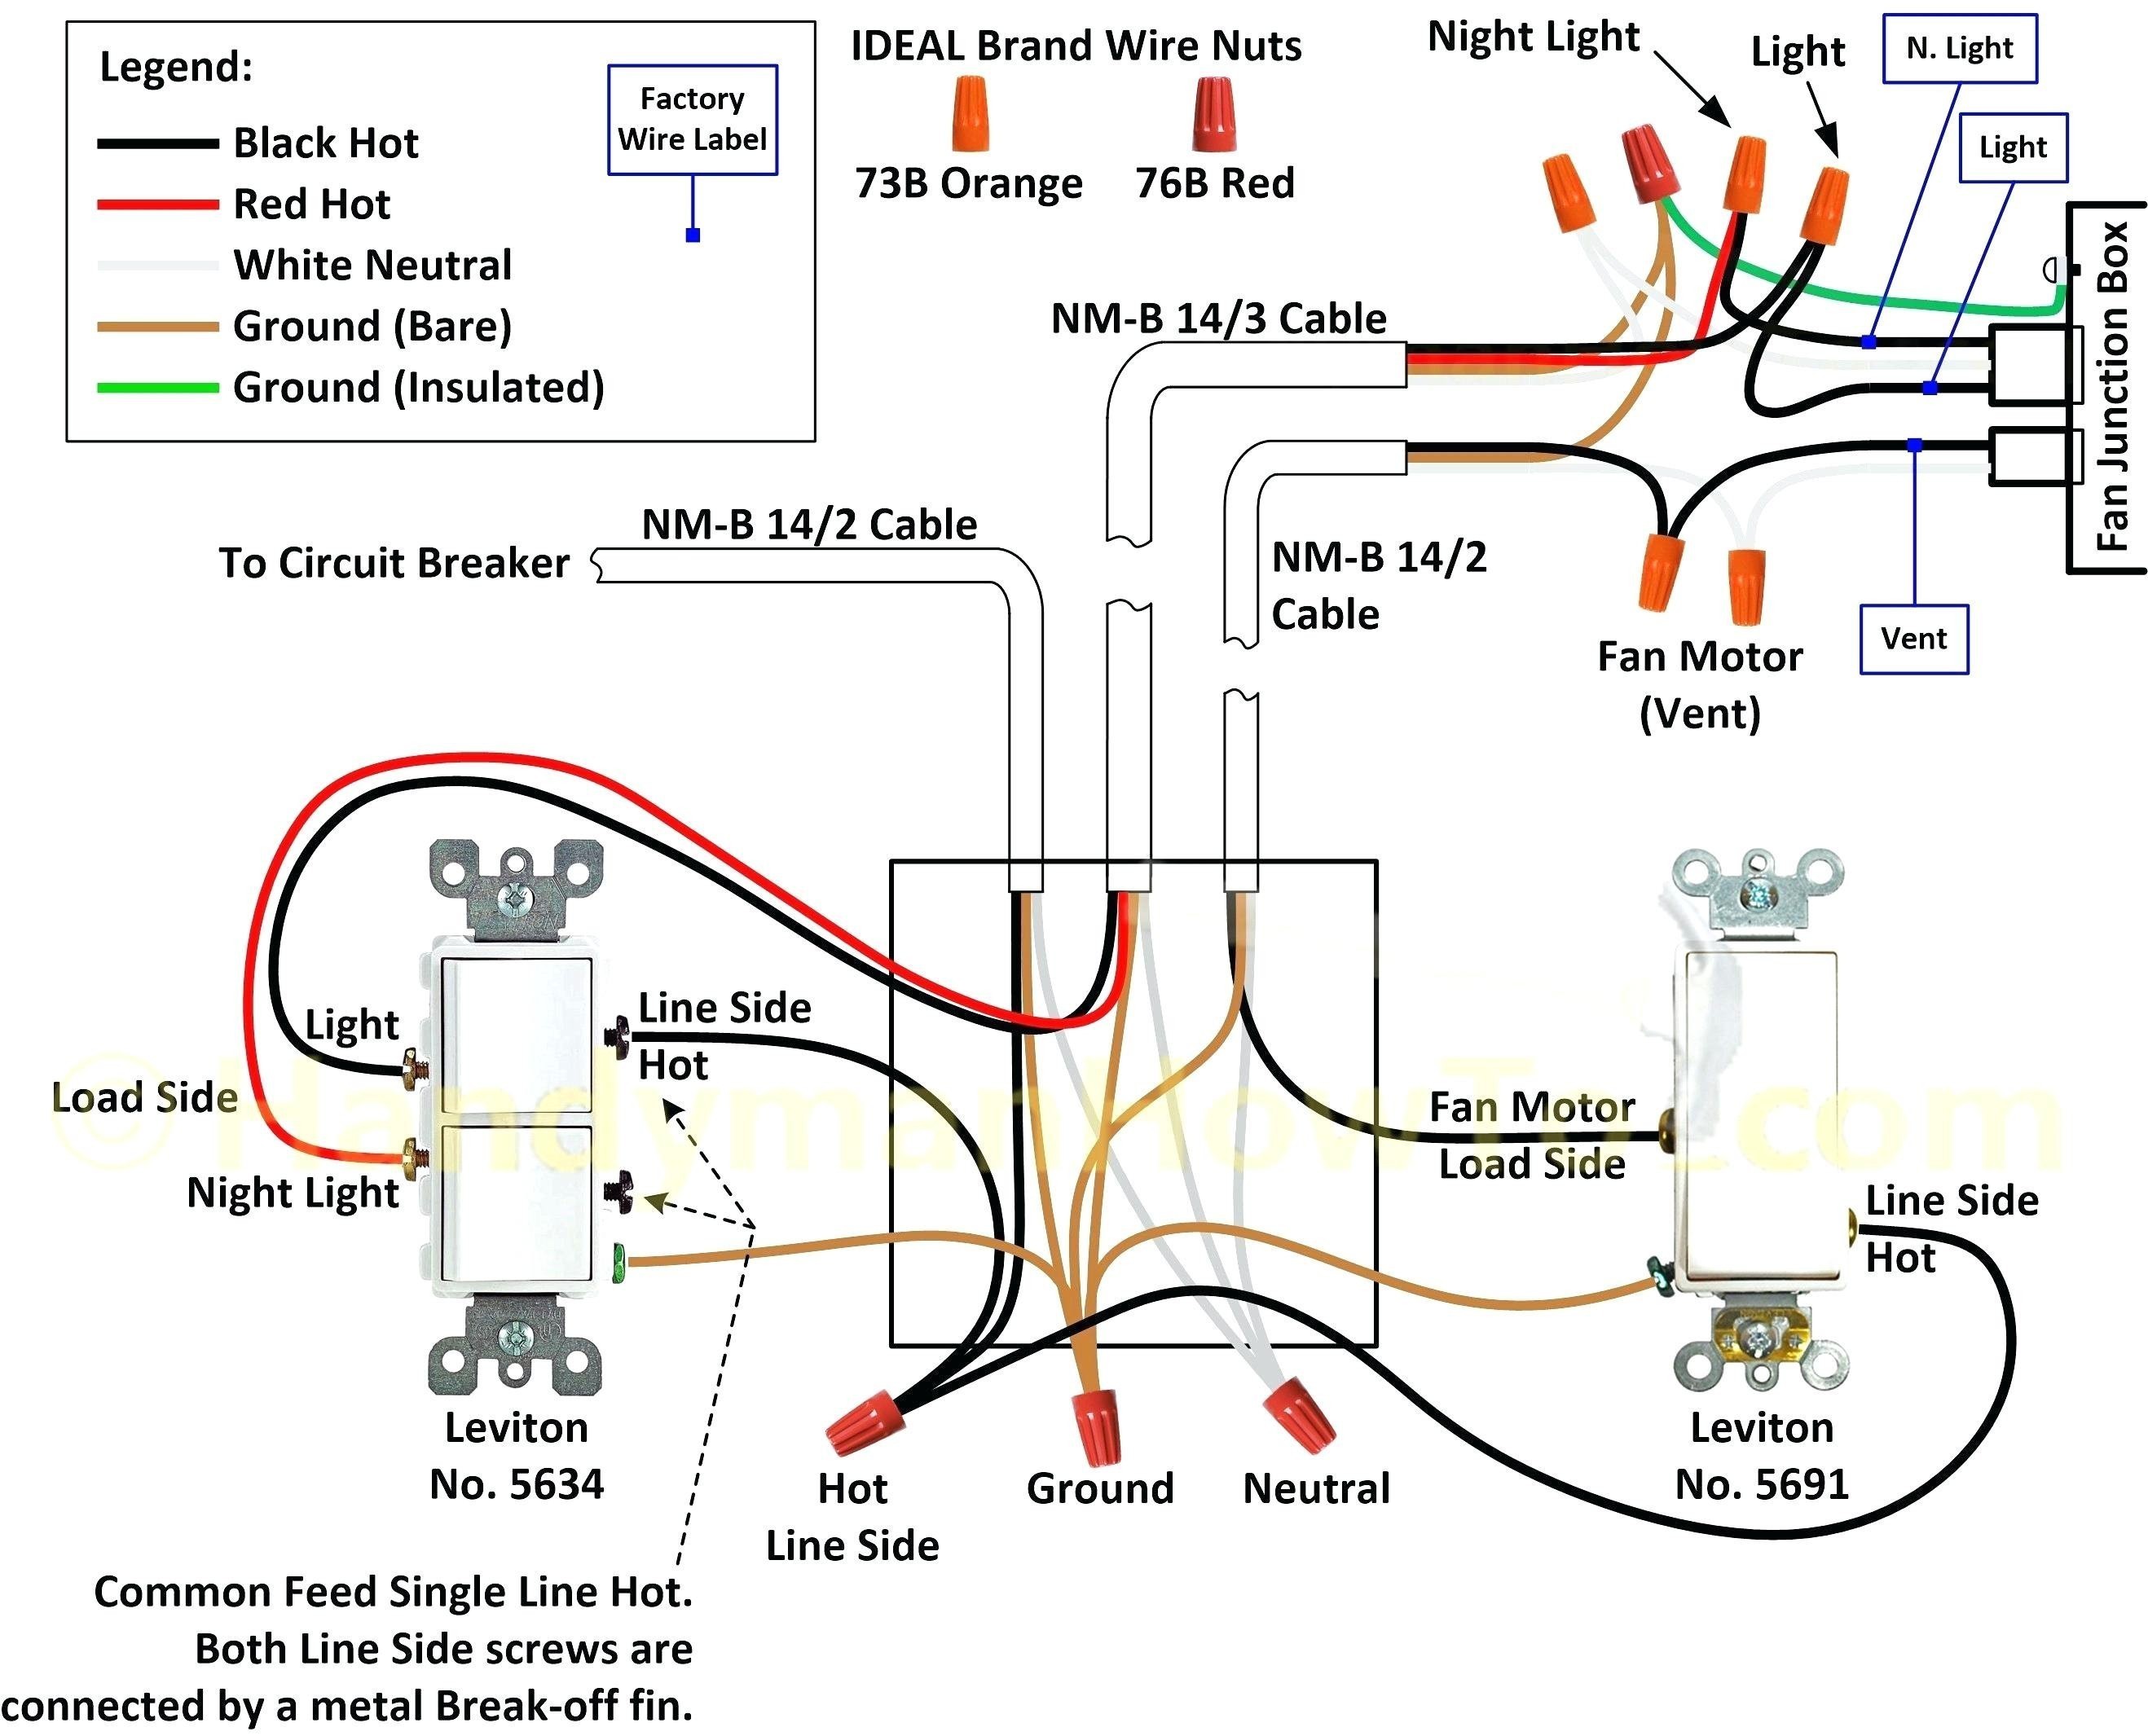 Internal Wiring Diagram For Ceiling Fan New Internal Wiring Diagram Ceiling Fan Light Save Wiring Diagram For